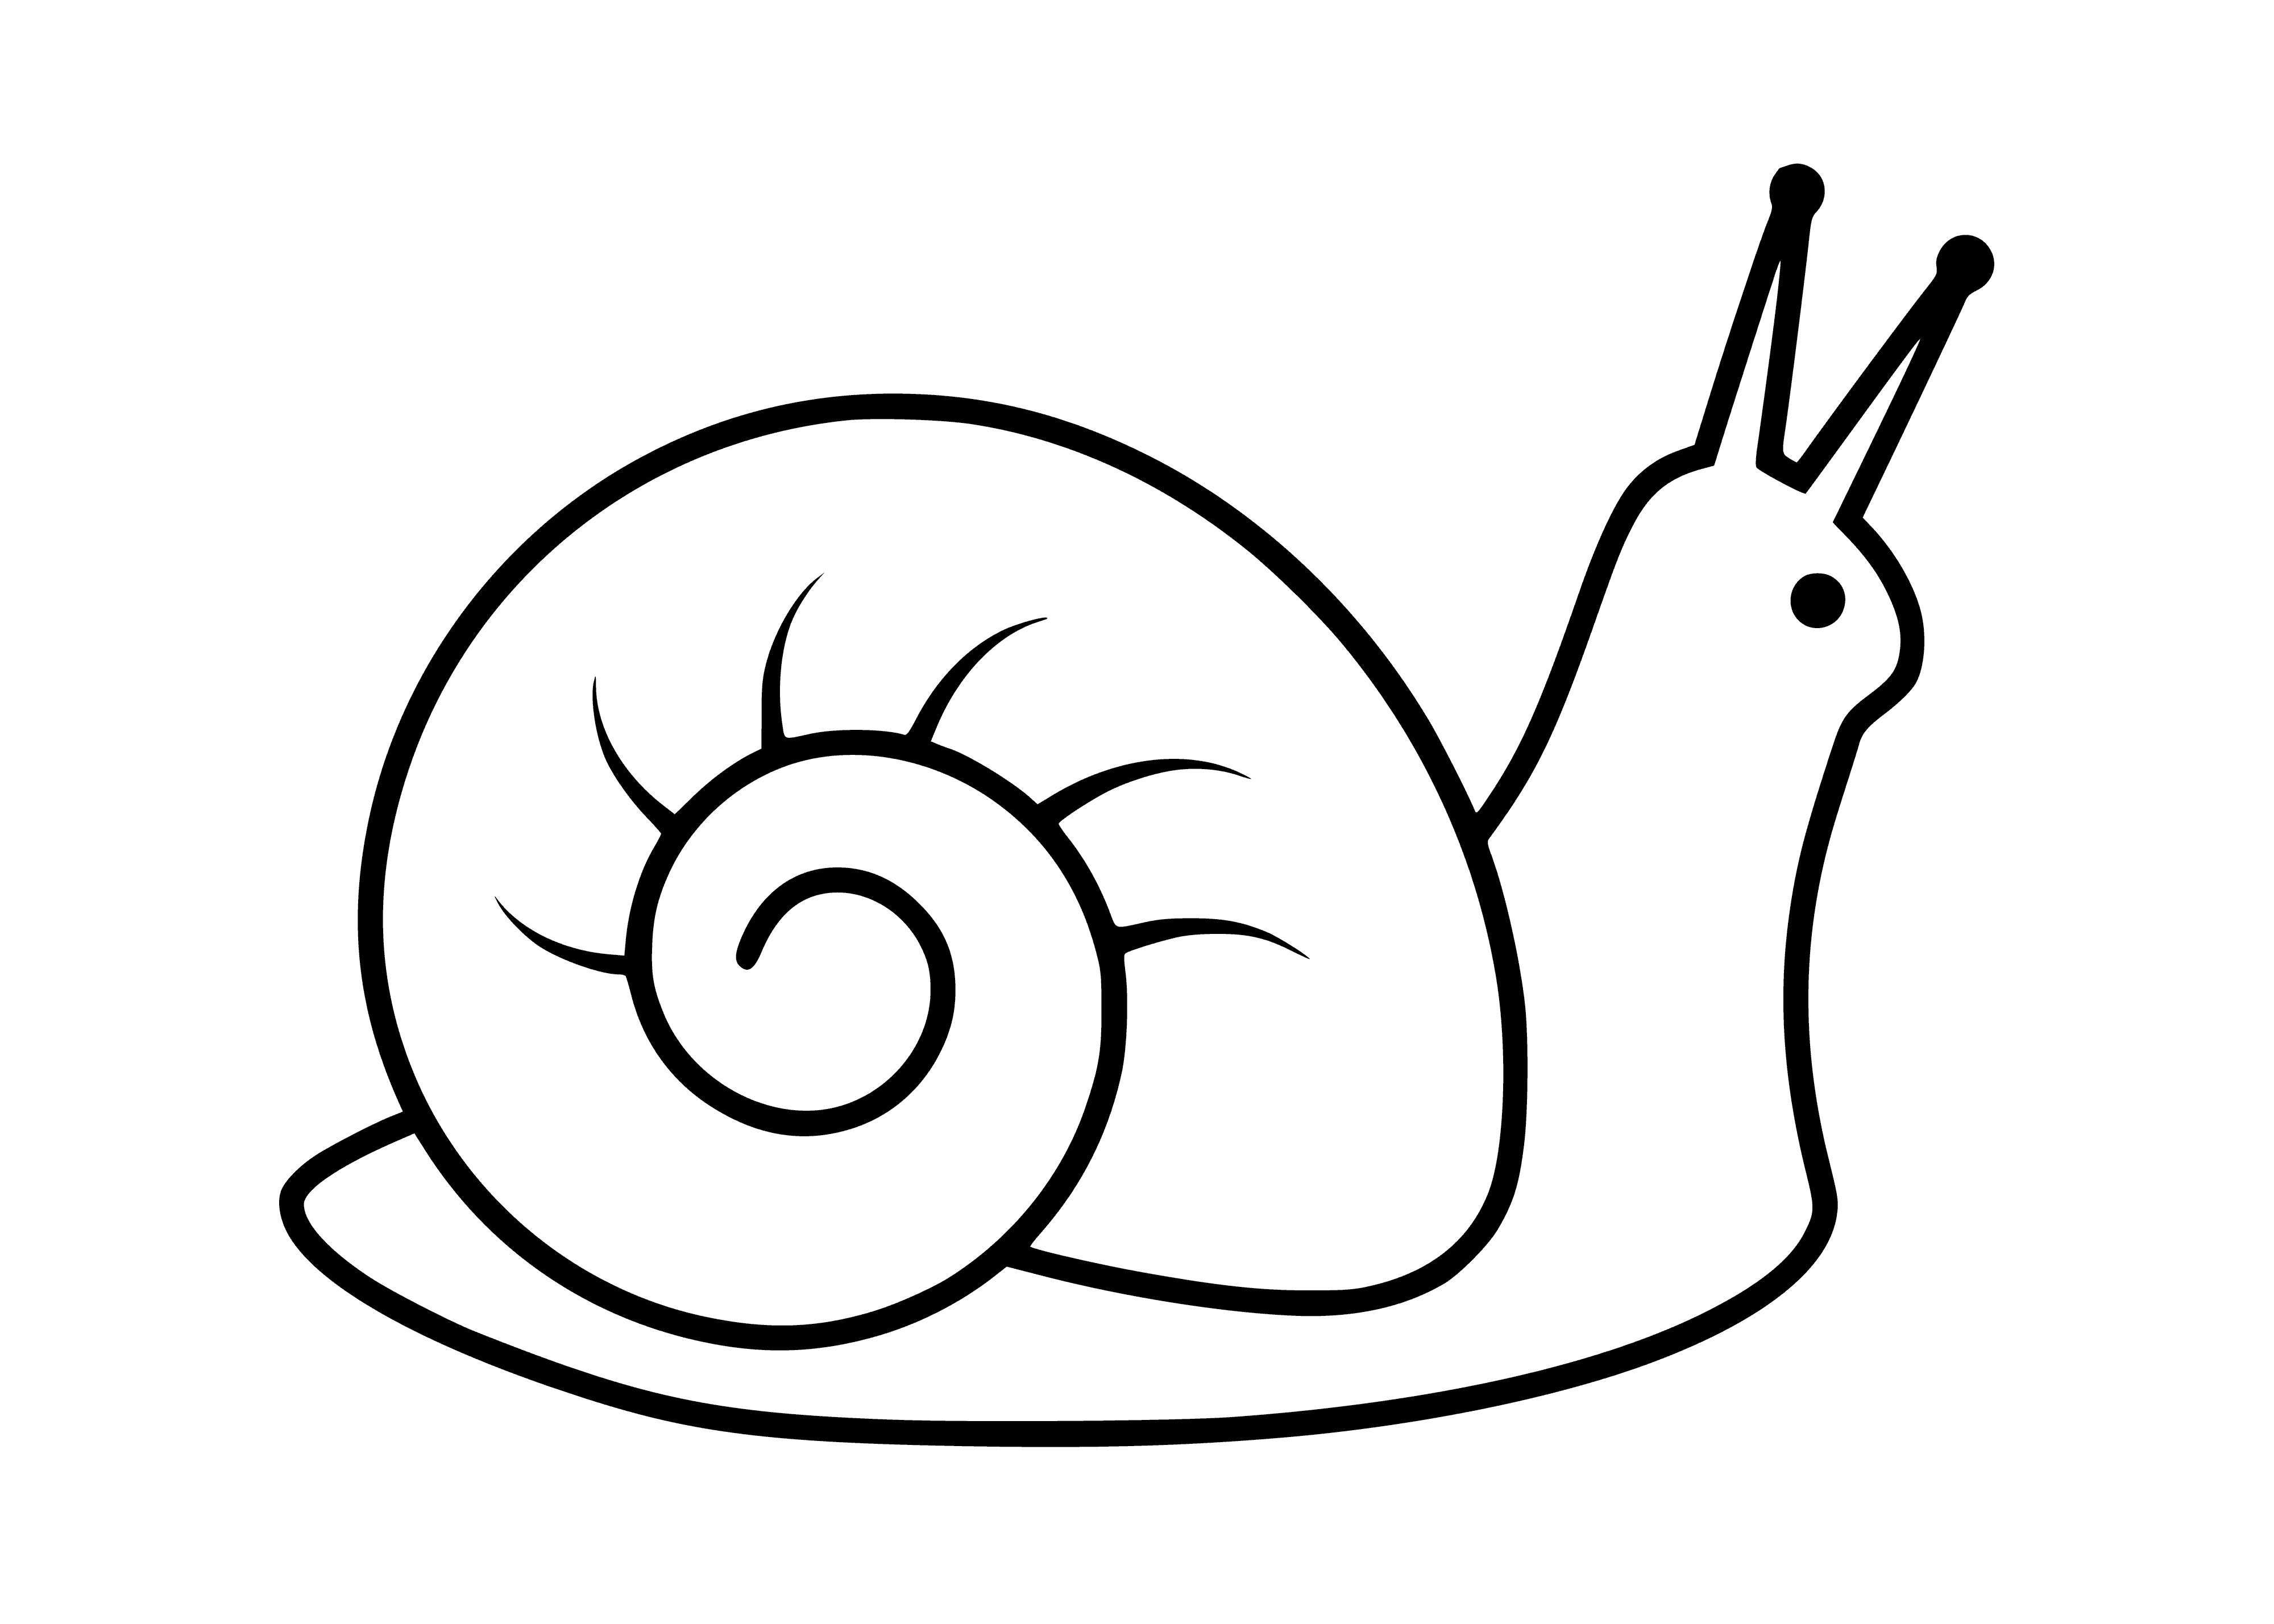 coloring page: Snail on coloring page has brown shell, yellow body, 2 antennae, 2 eyes, crawling on green leaf.